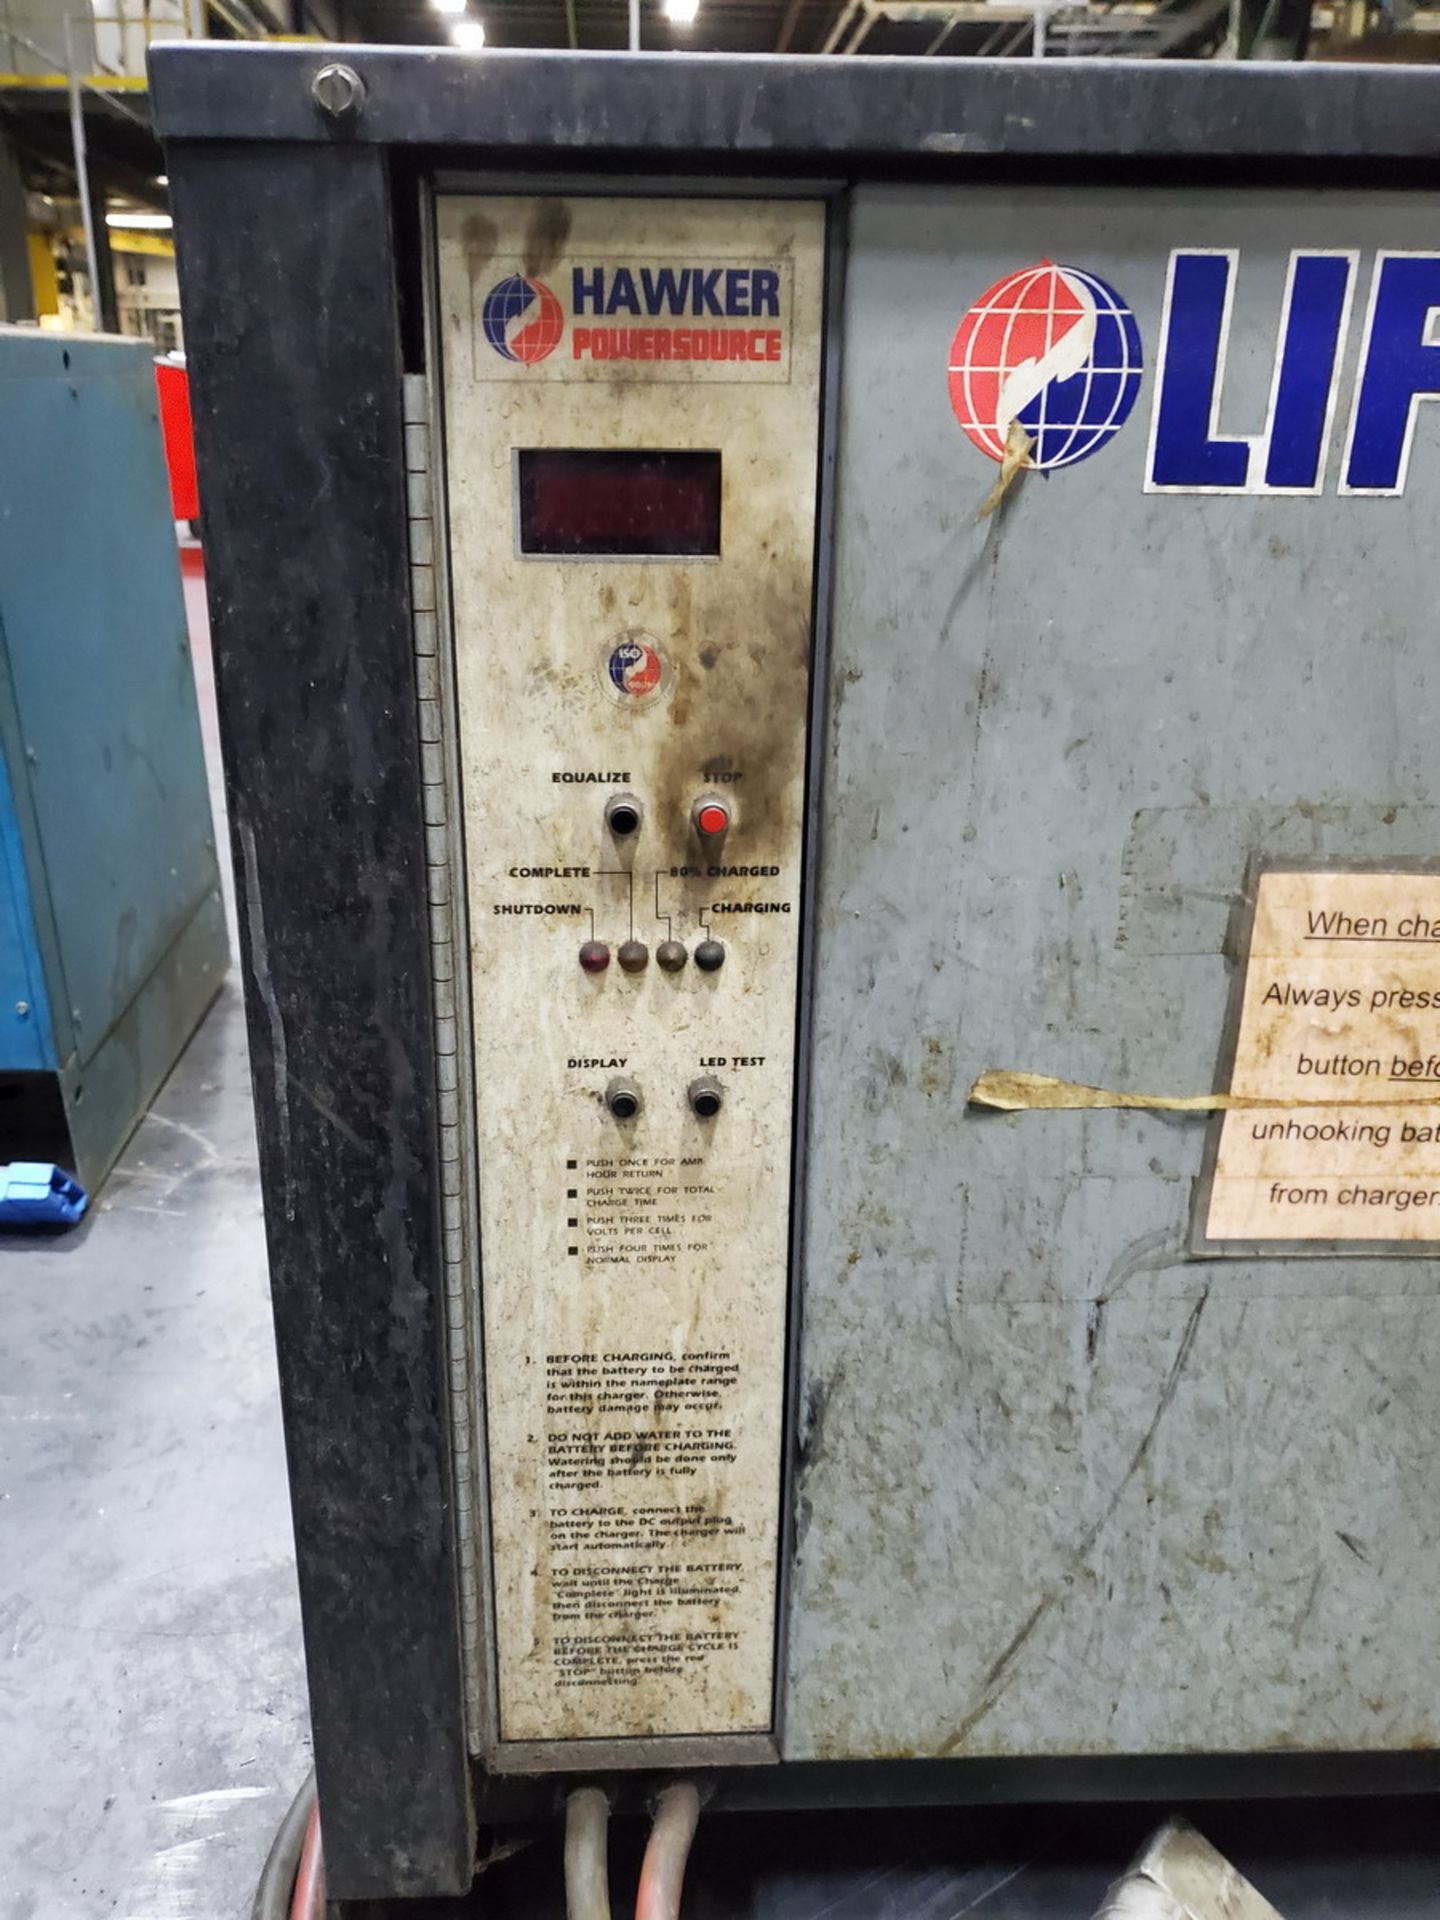 Lifeguard Industrial Battery Charger 8hr Charge Time, 208/240/480V, 3PH, 60HZ - Image 4 of 5